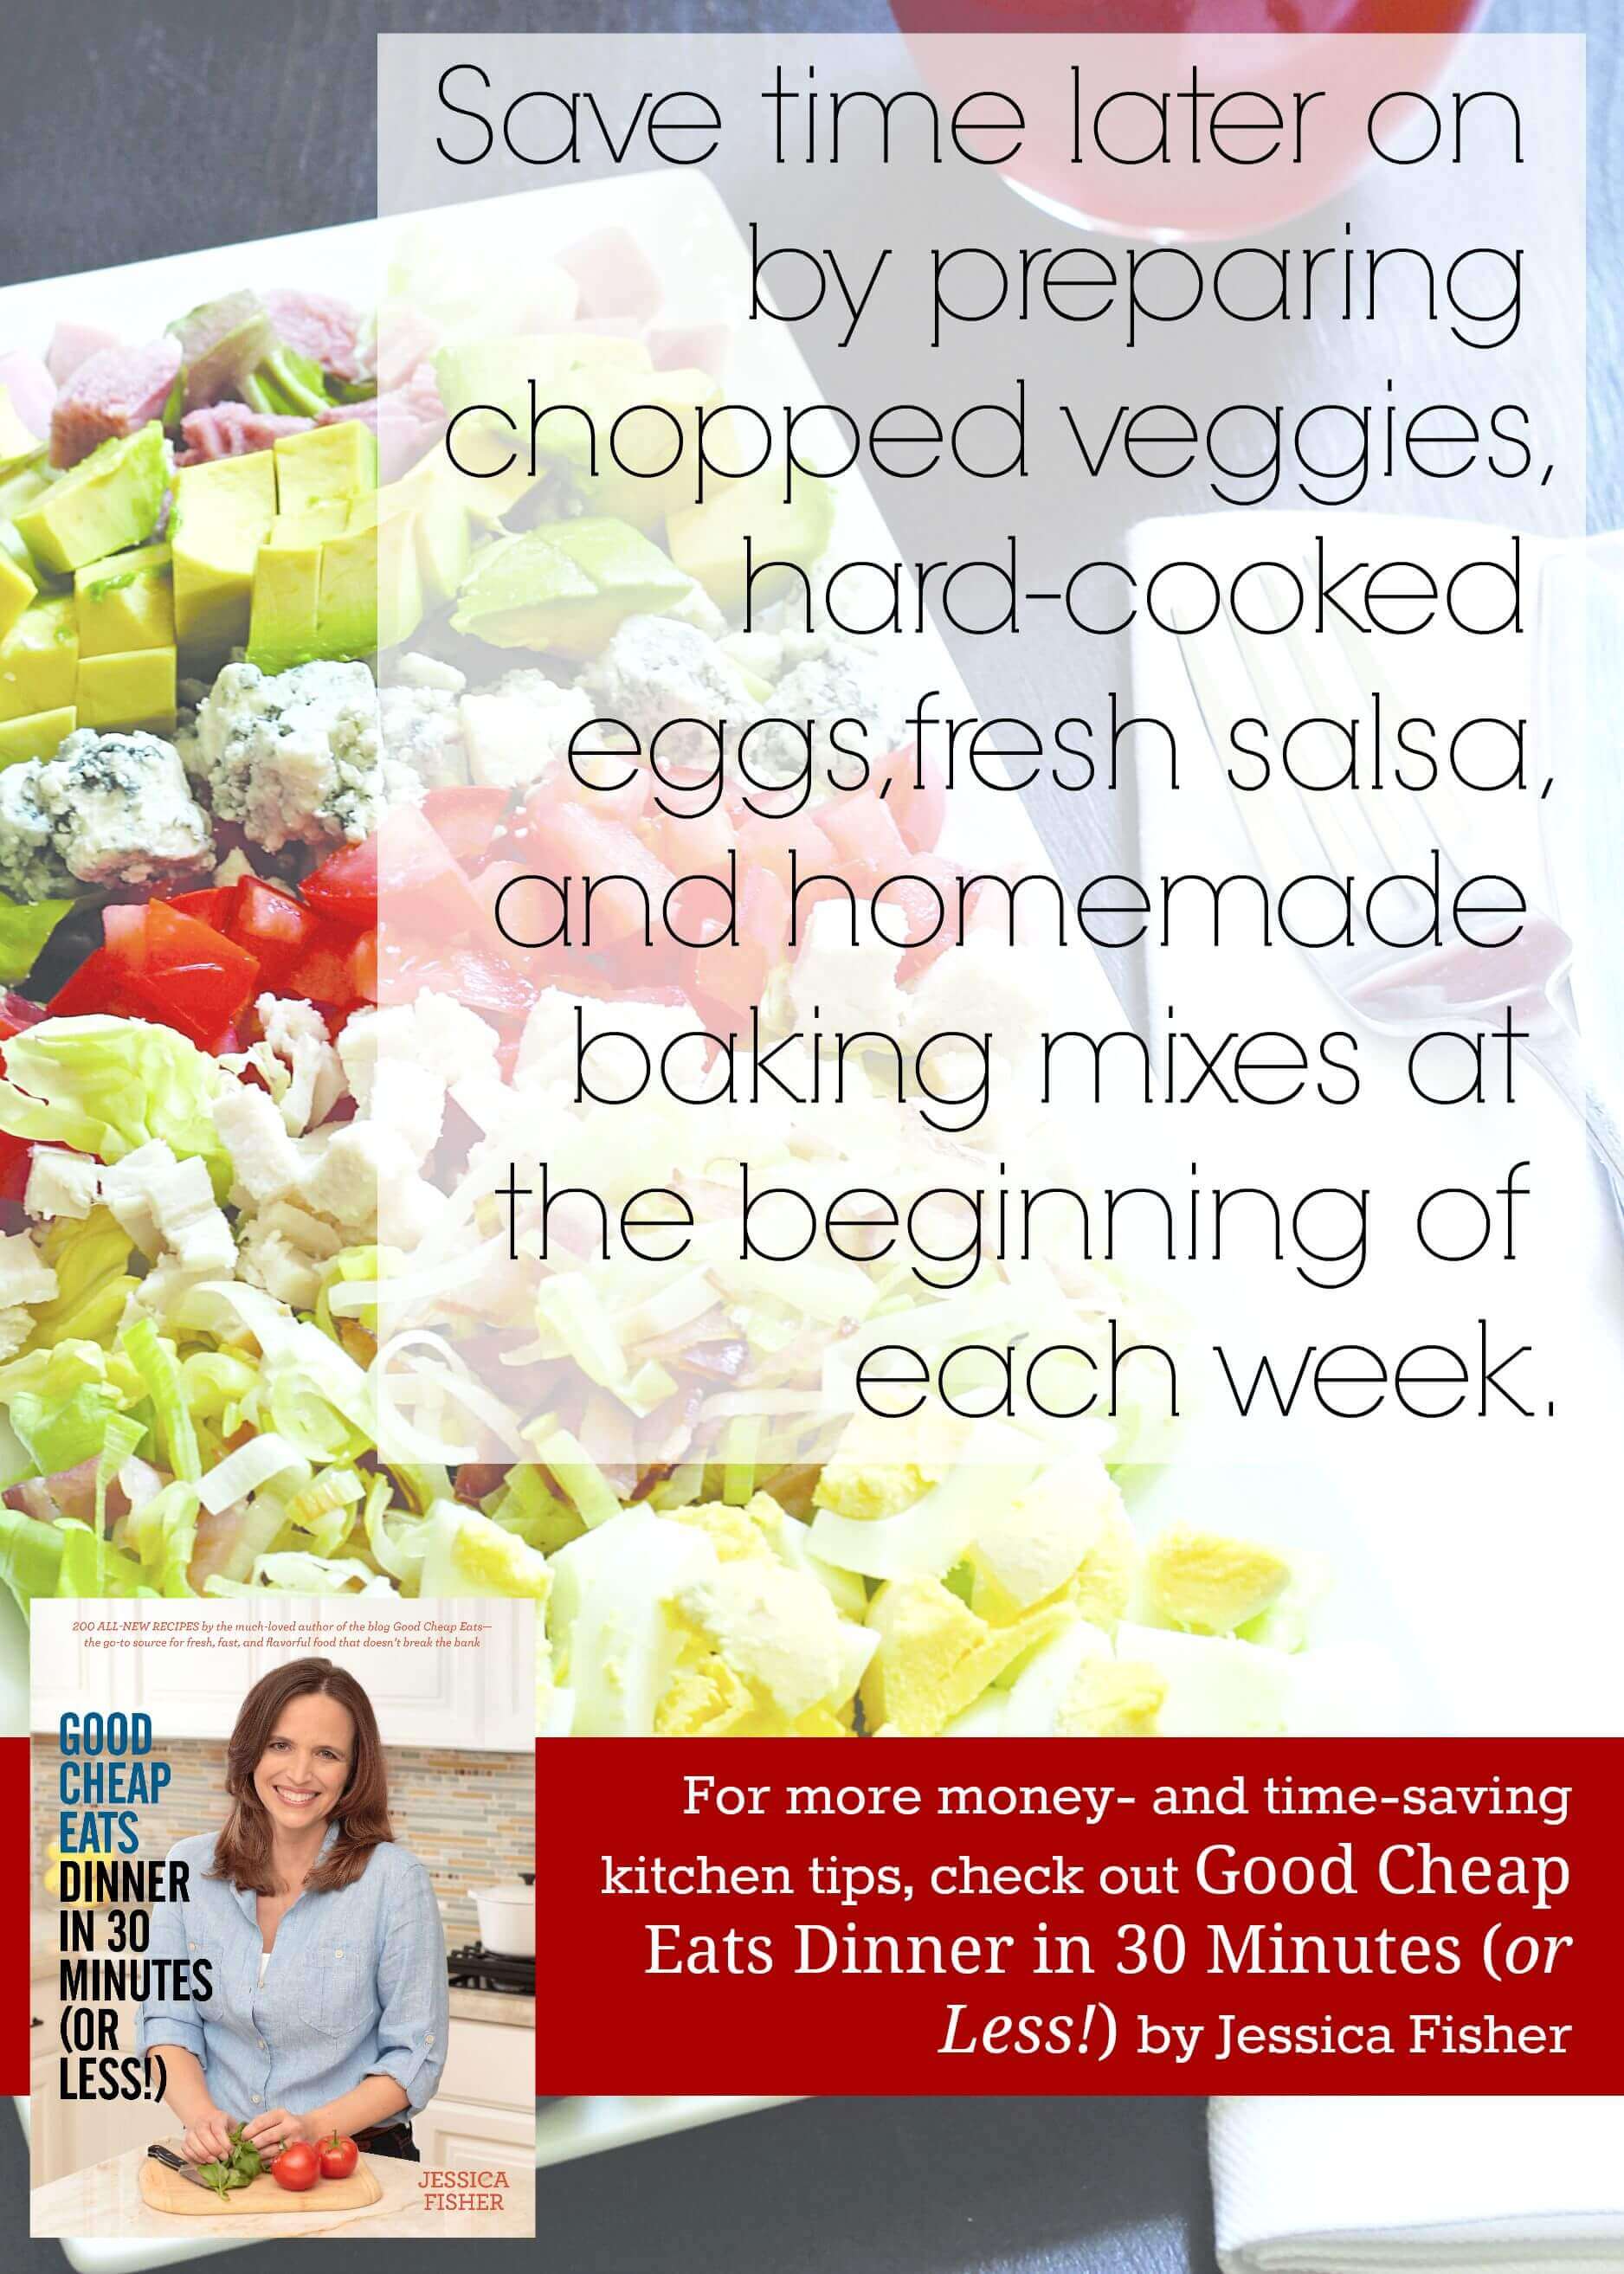 Do you love serving up homemade food to your family but wish it didn't take so much time? Here's some of the top secrets from Jessica from Good Cheap Eats! Have a REAL FOOD dinner on the table in 30 minutes or less with these secrets! Plus, recipes for her amazing zucchini fritters!